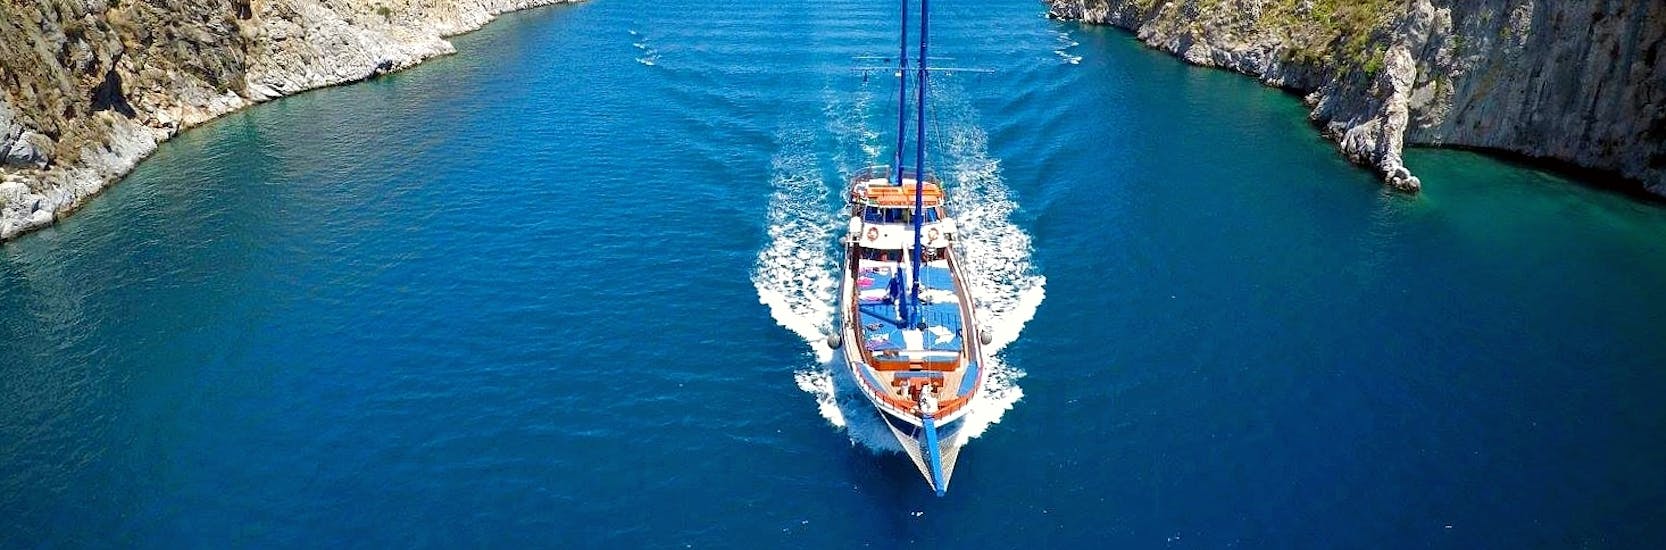 An elegant sailboat sailing rapidly on the blue waters around the Dodecanese islands during a sailing boat trip to the islands Kalymnos, Plati & Pserimos with Odyssey Boat.